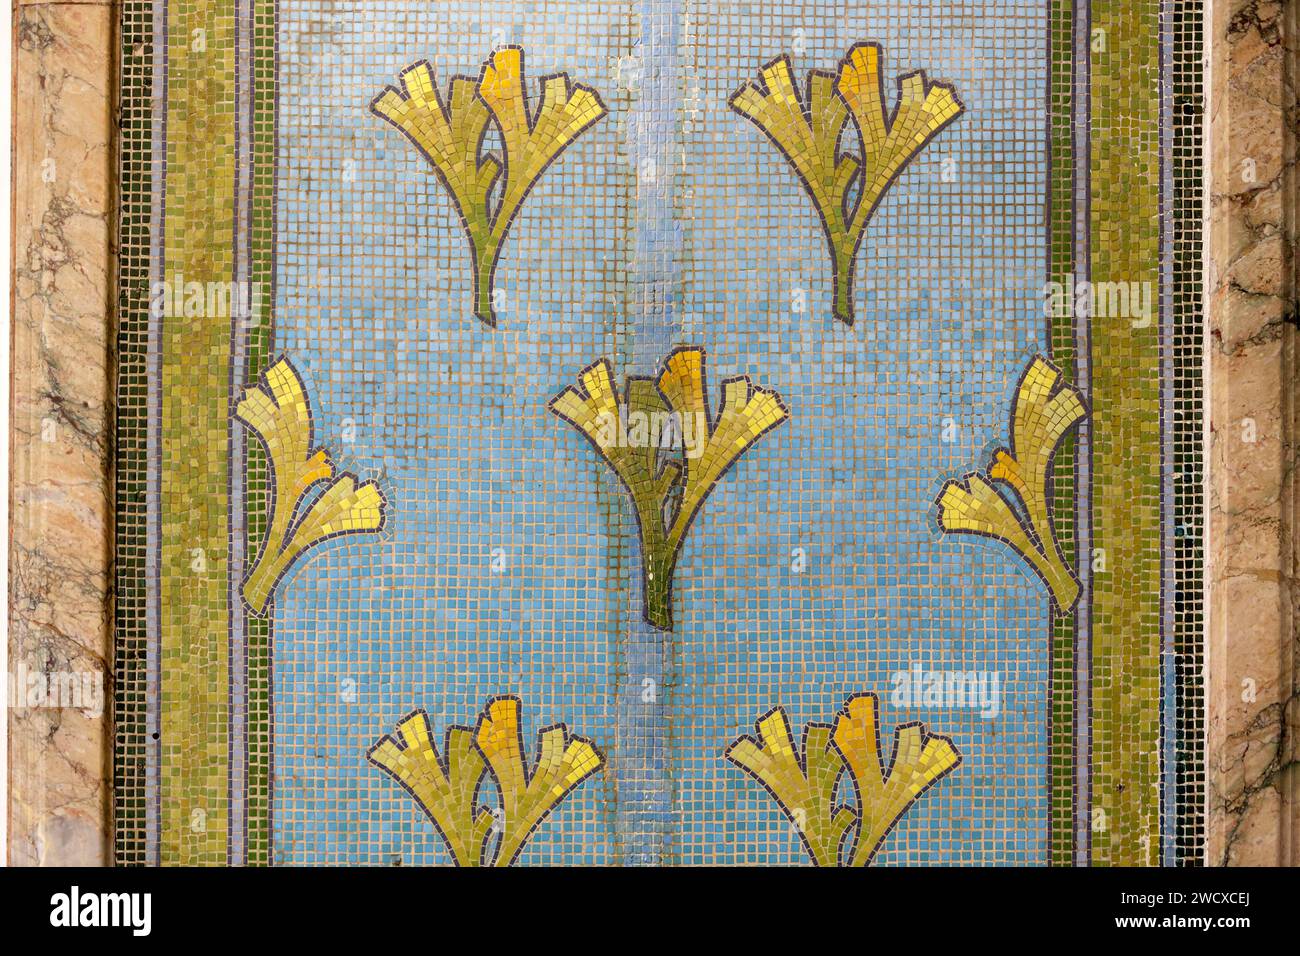 France, Meurthe et Moselle, Nancy, mosaic on the wall of the house in Art Nouveau style called Chateau de la Garenne located in the Eaux Bleues domain which belongs to the Foundation Nicolas Gridel built in 1897 then converted in 1904 by architect Lucien Weissenburger for Antoine Corbin owner of the Magasins Reunis in Nancy Stock Photo